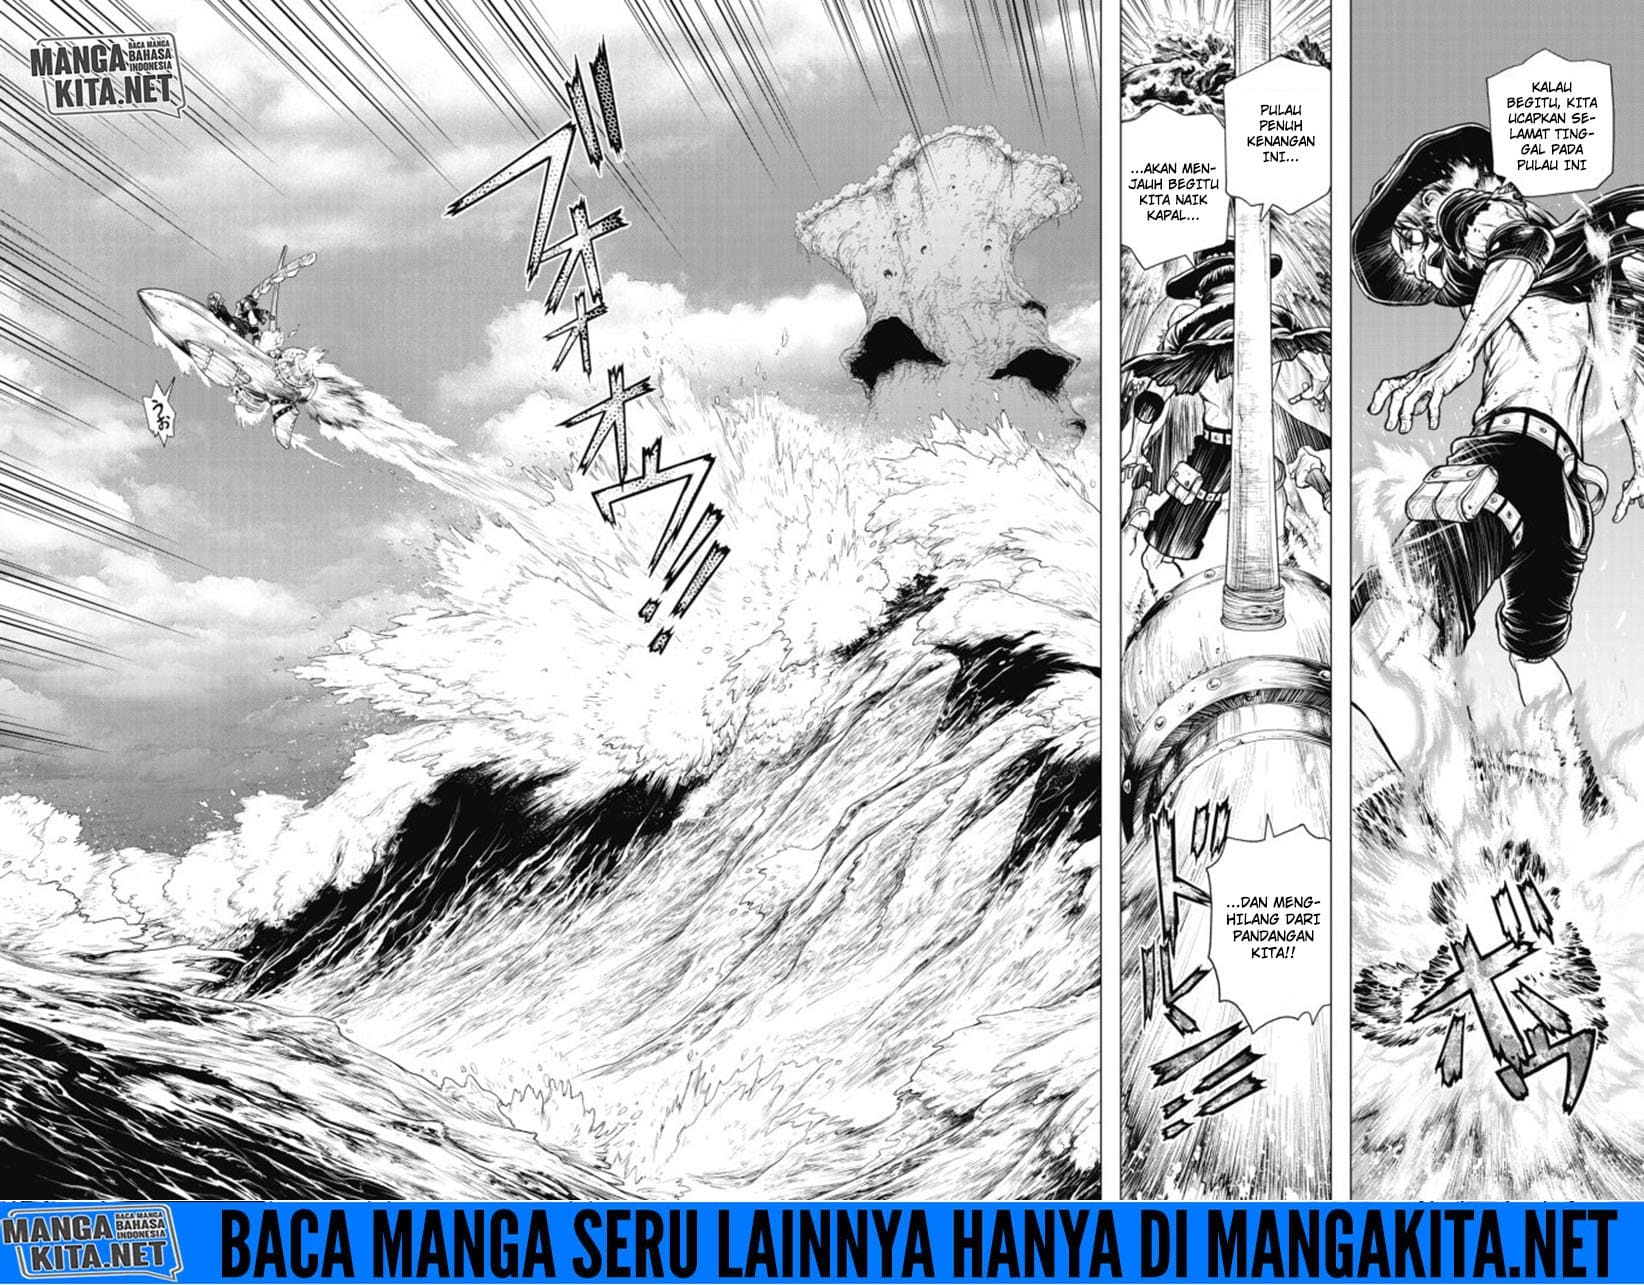 One Piece: Ace Story Chapter 01